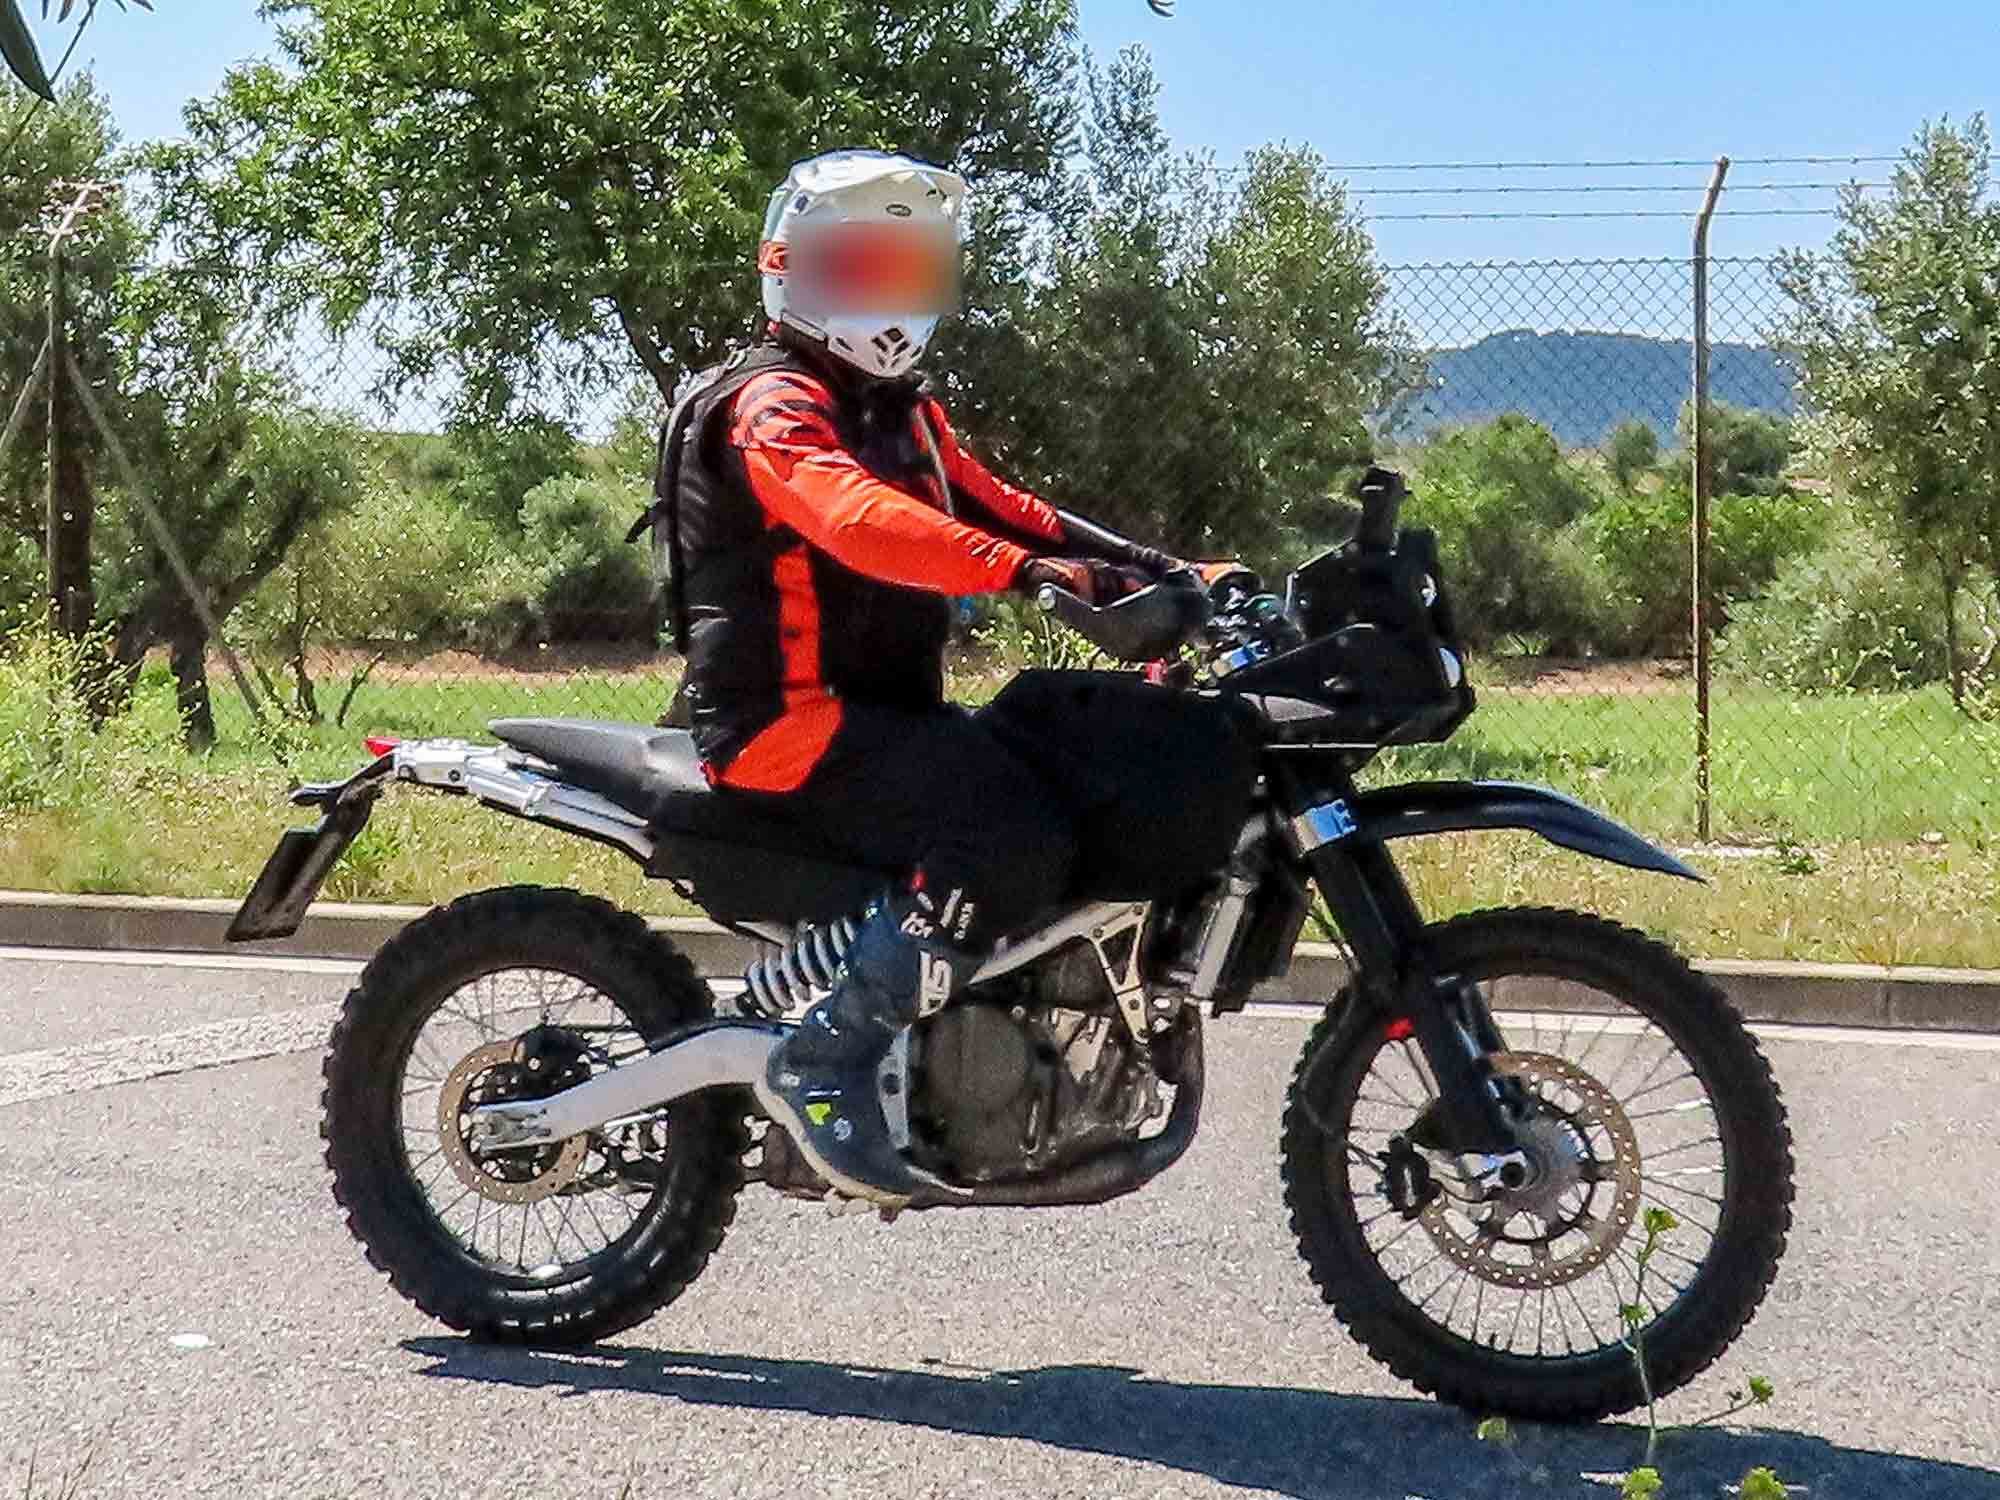 We’re not sure if this bike will be a KTM, a GasGas, or both, but judging by its finish, we’d say it’s a 390cc Rally model and on the way.